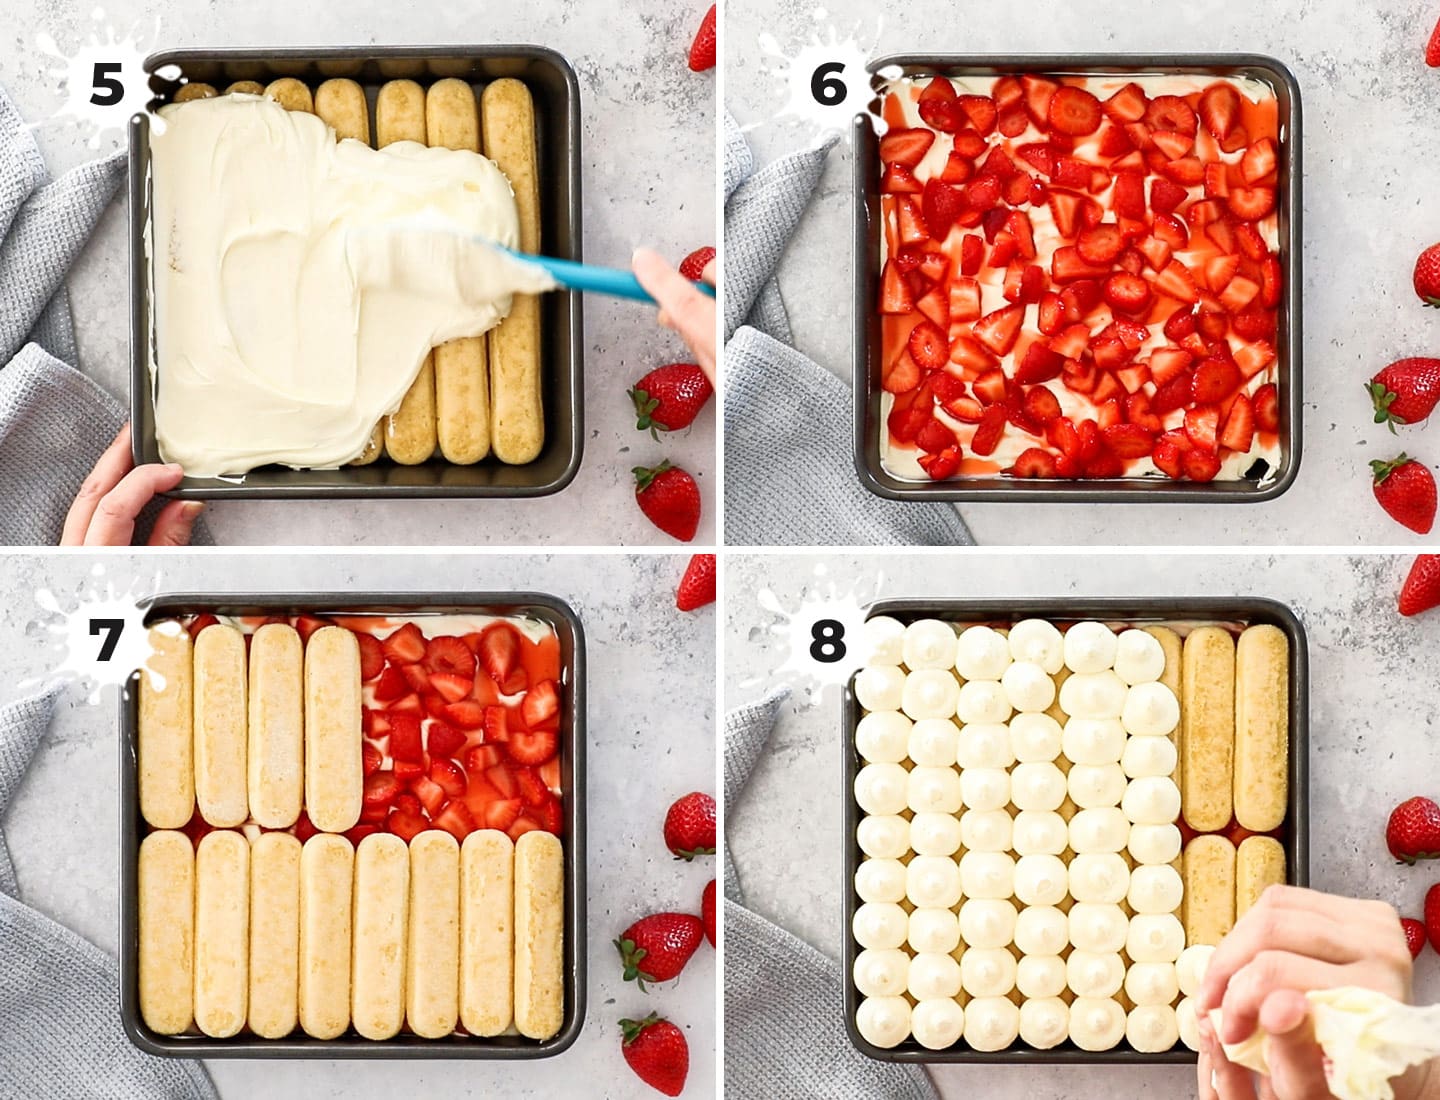 A collage showing how to assemble strawberry tiramisu.